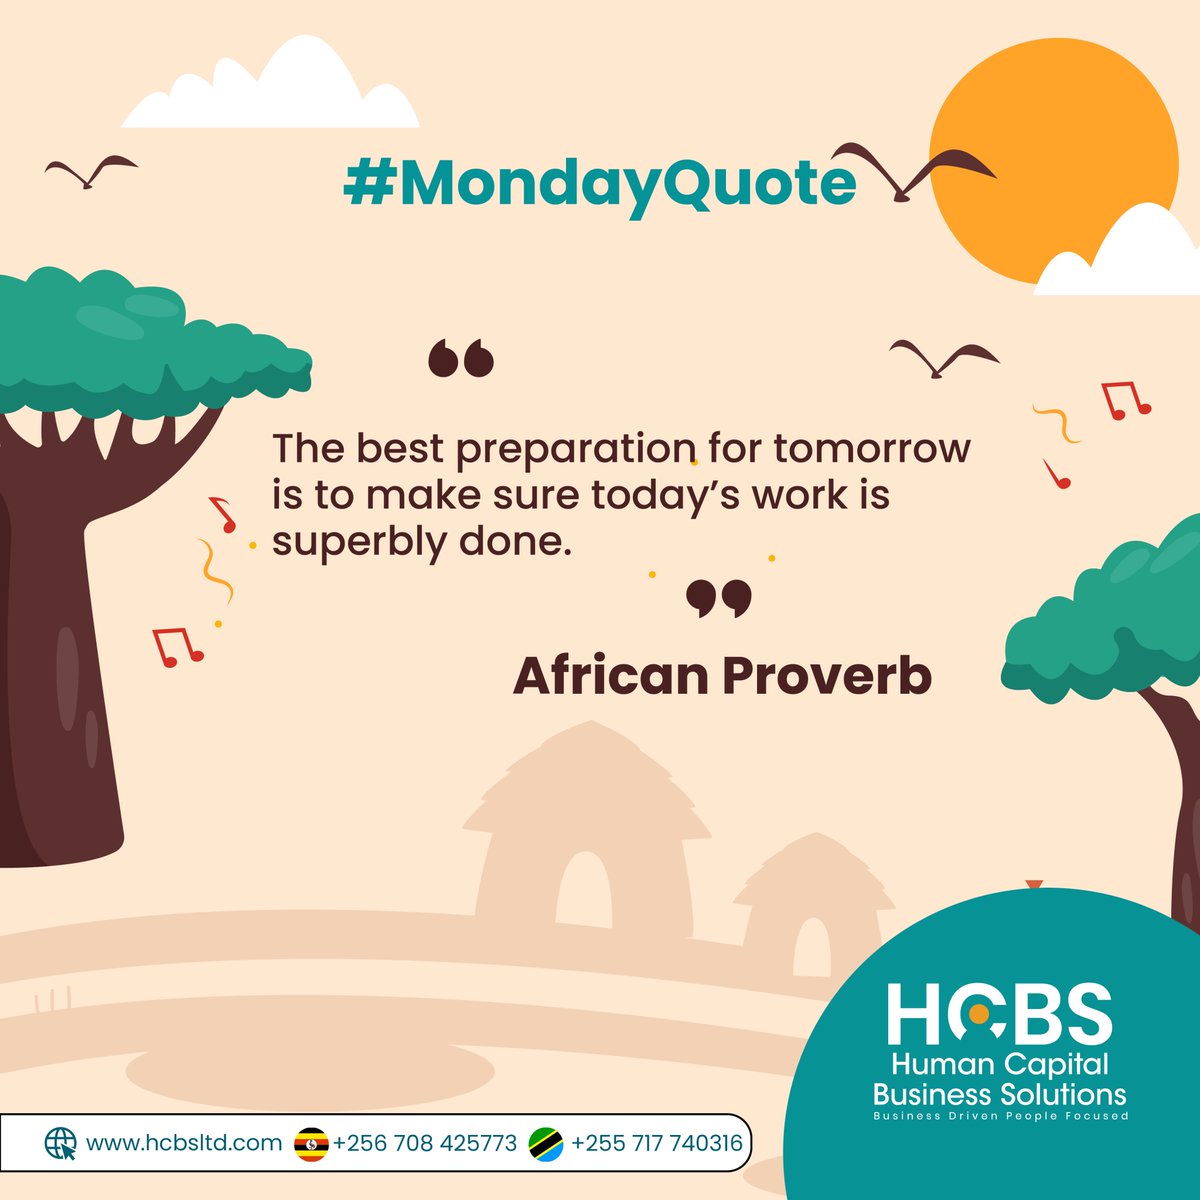 #MondayQuote: Every day is an opportunity to excel.

Happy new week!